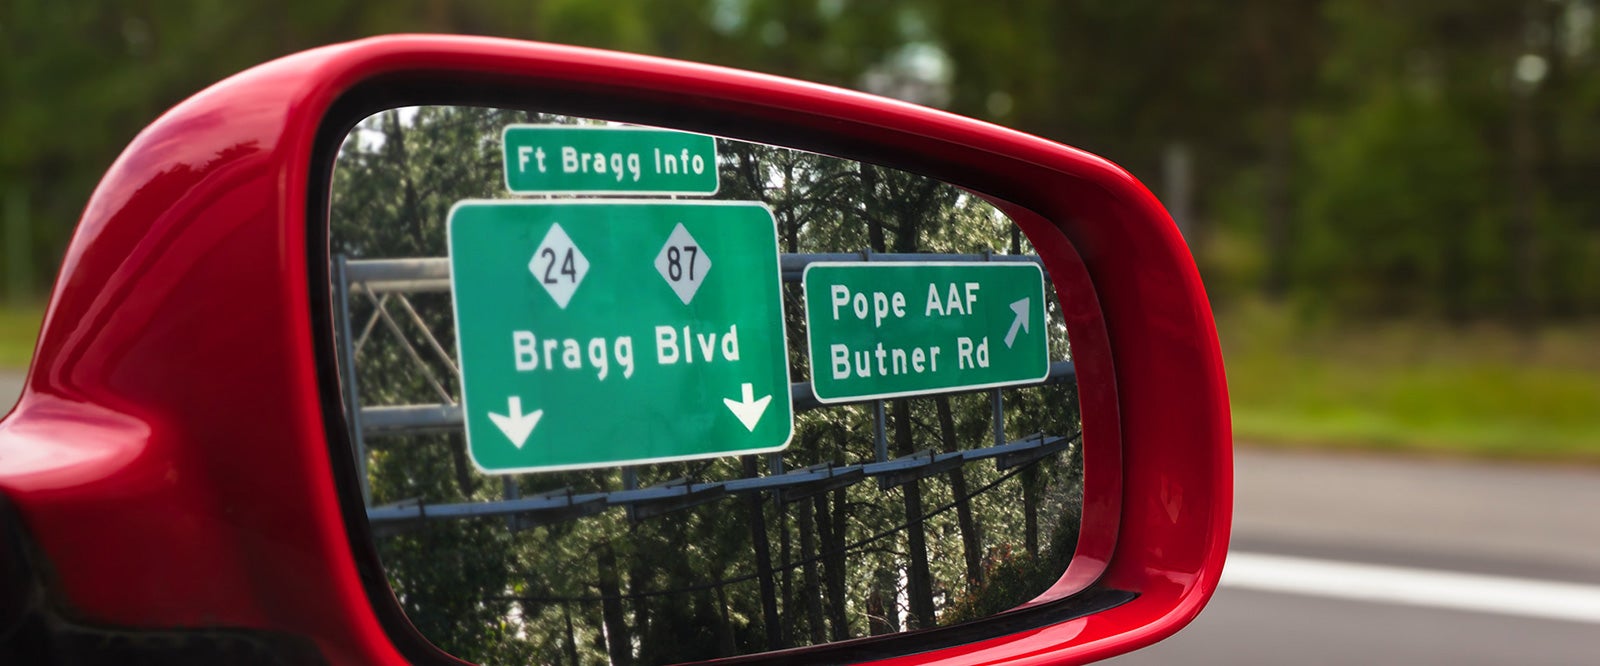 Road signs visible in the side mirror of a vehicle during a PCS.